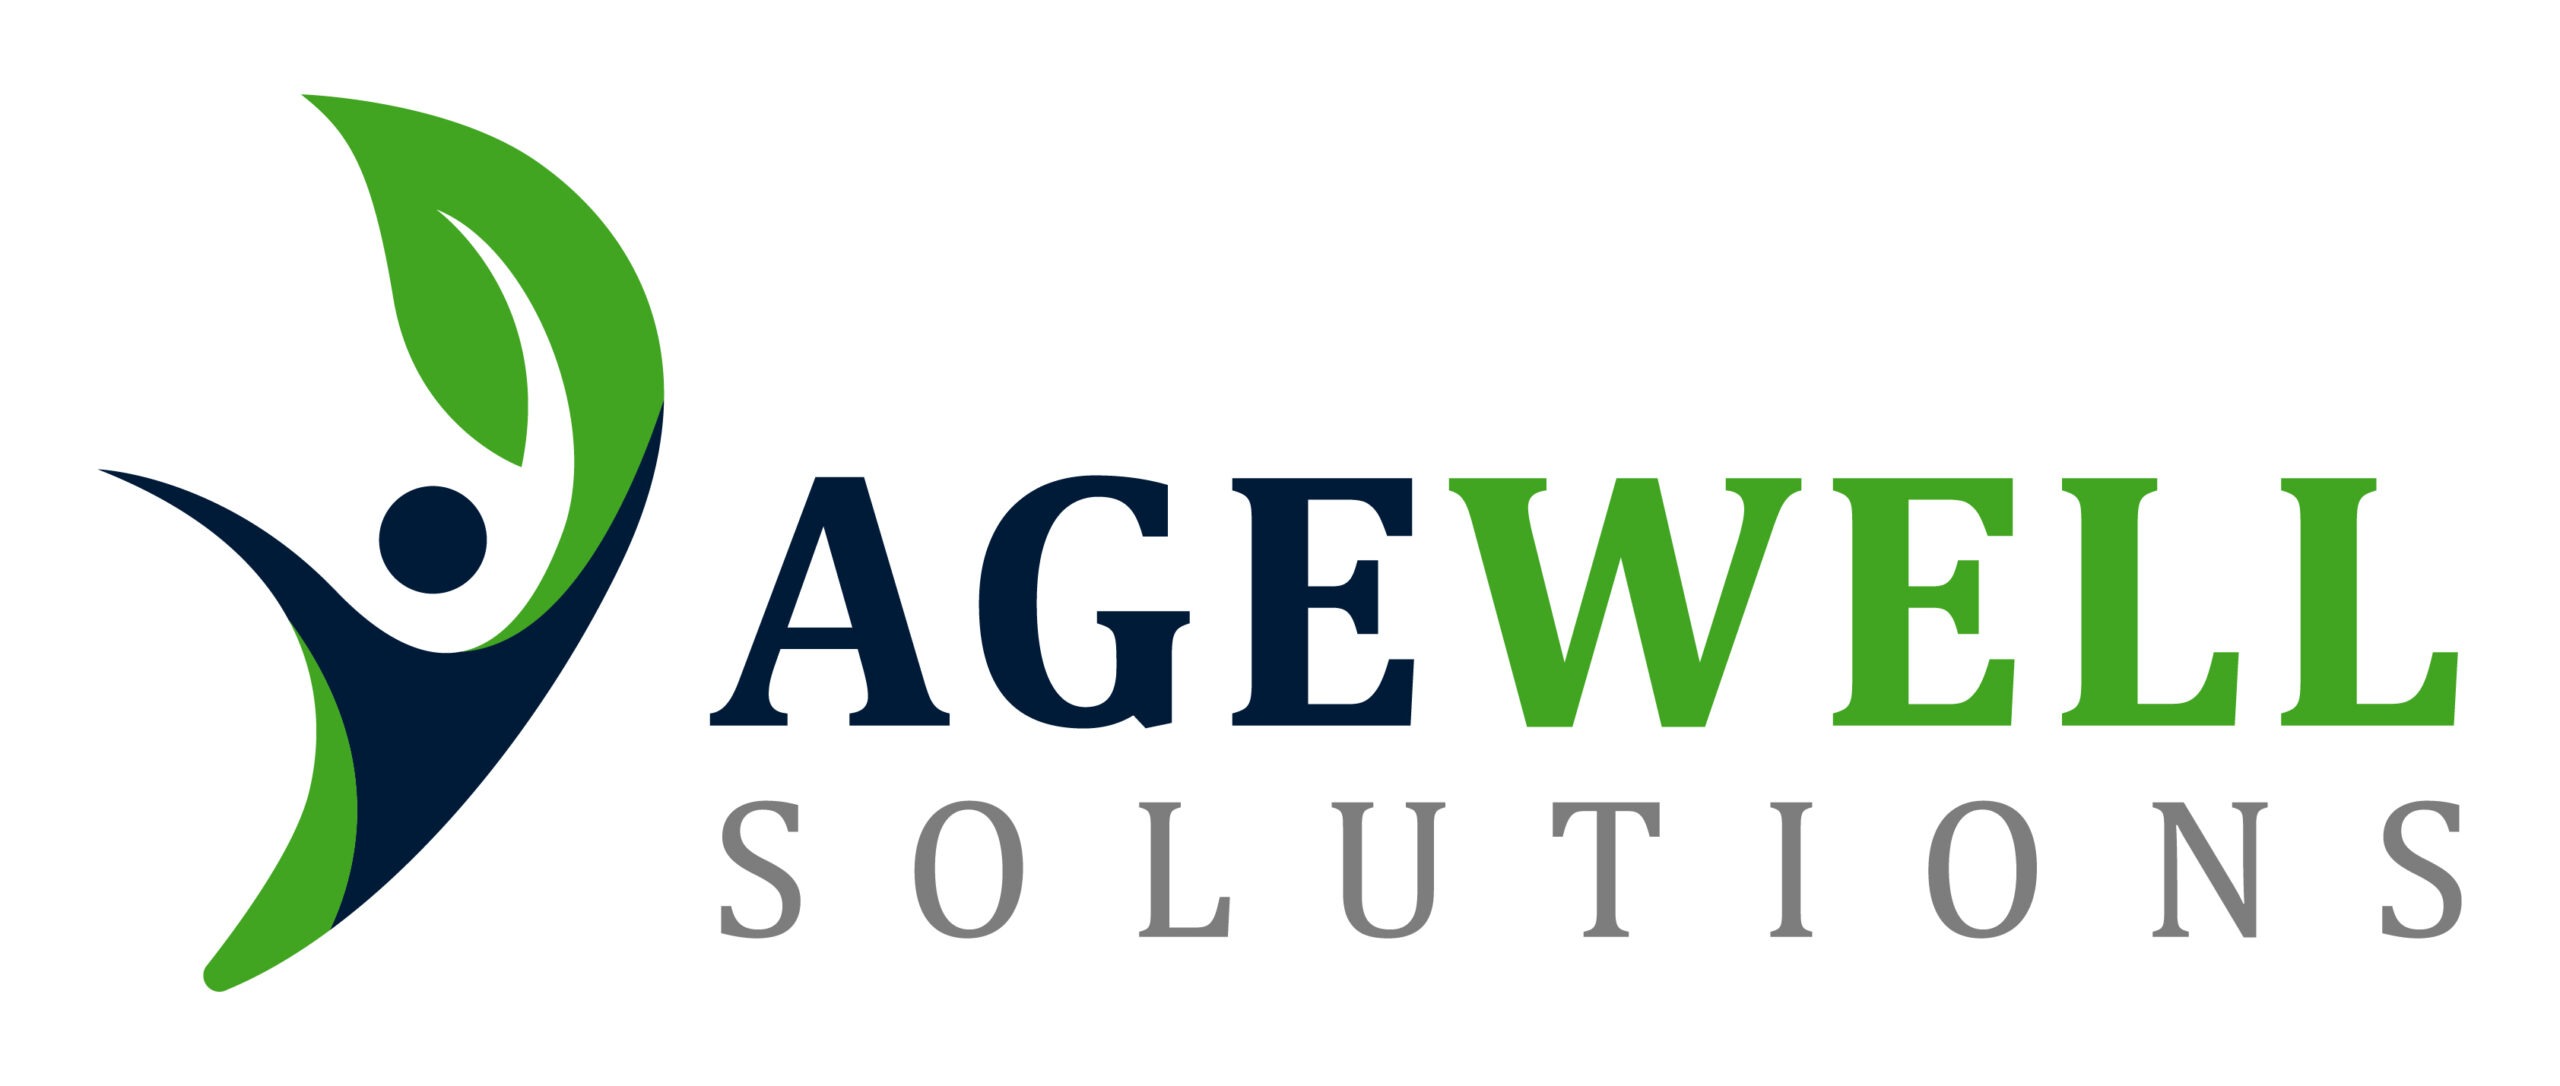 Age Well Solutions Logo